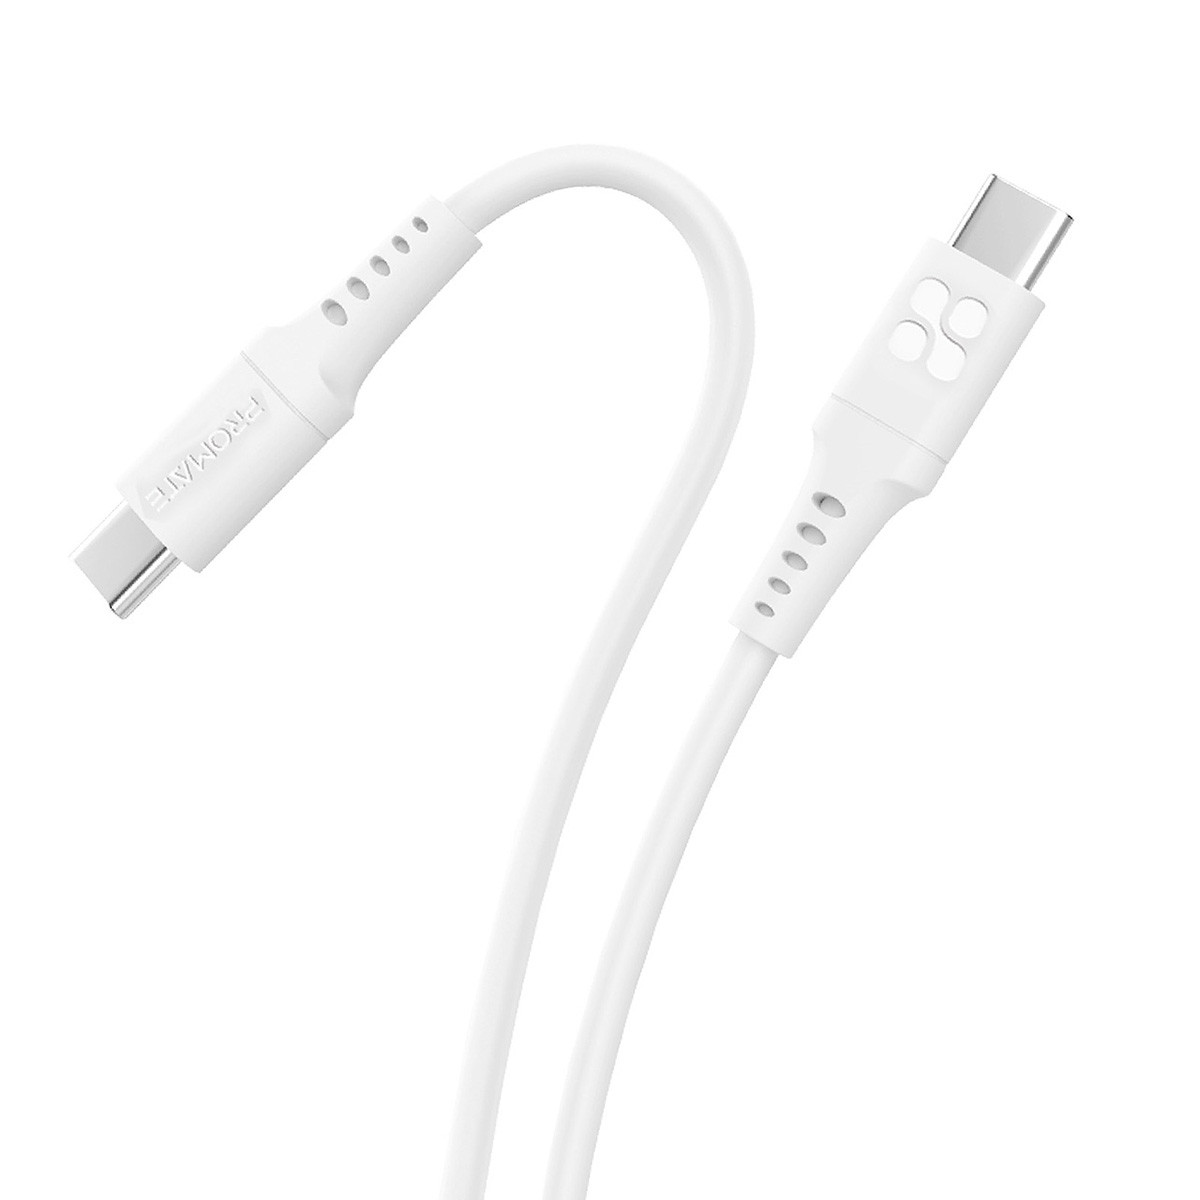 Promate USB-C to USB-C Cable with 60W PD, 480Mbps Data Sync and 120cm Silicone Cord, PowerLink-CC120 White